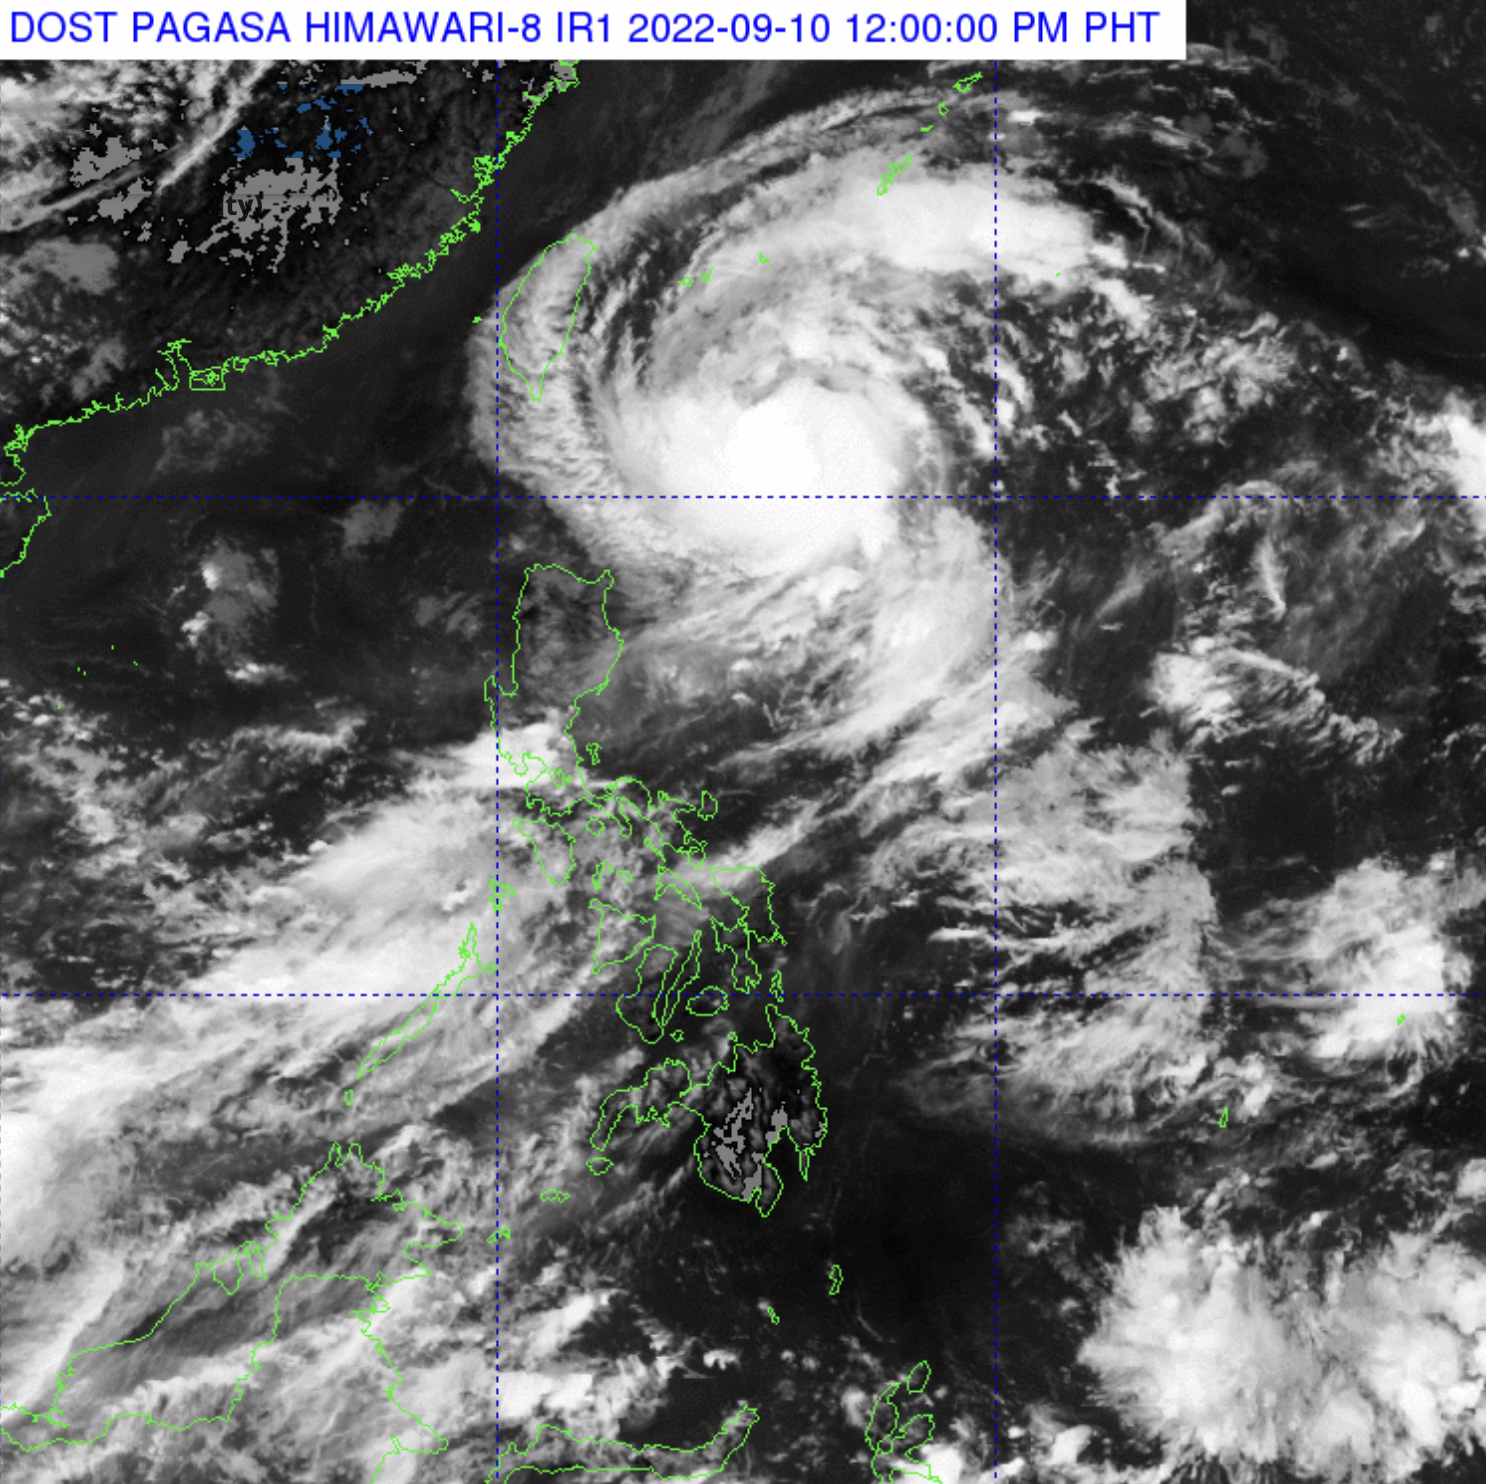 Inday now a Typhoon, may enhance southwest monsoon